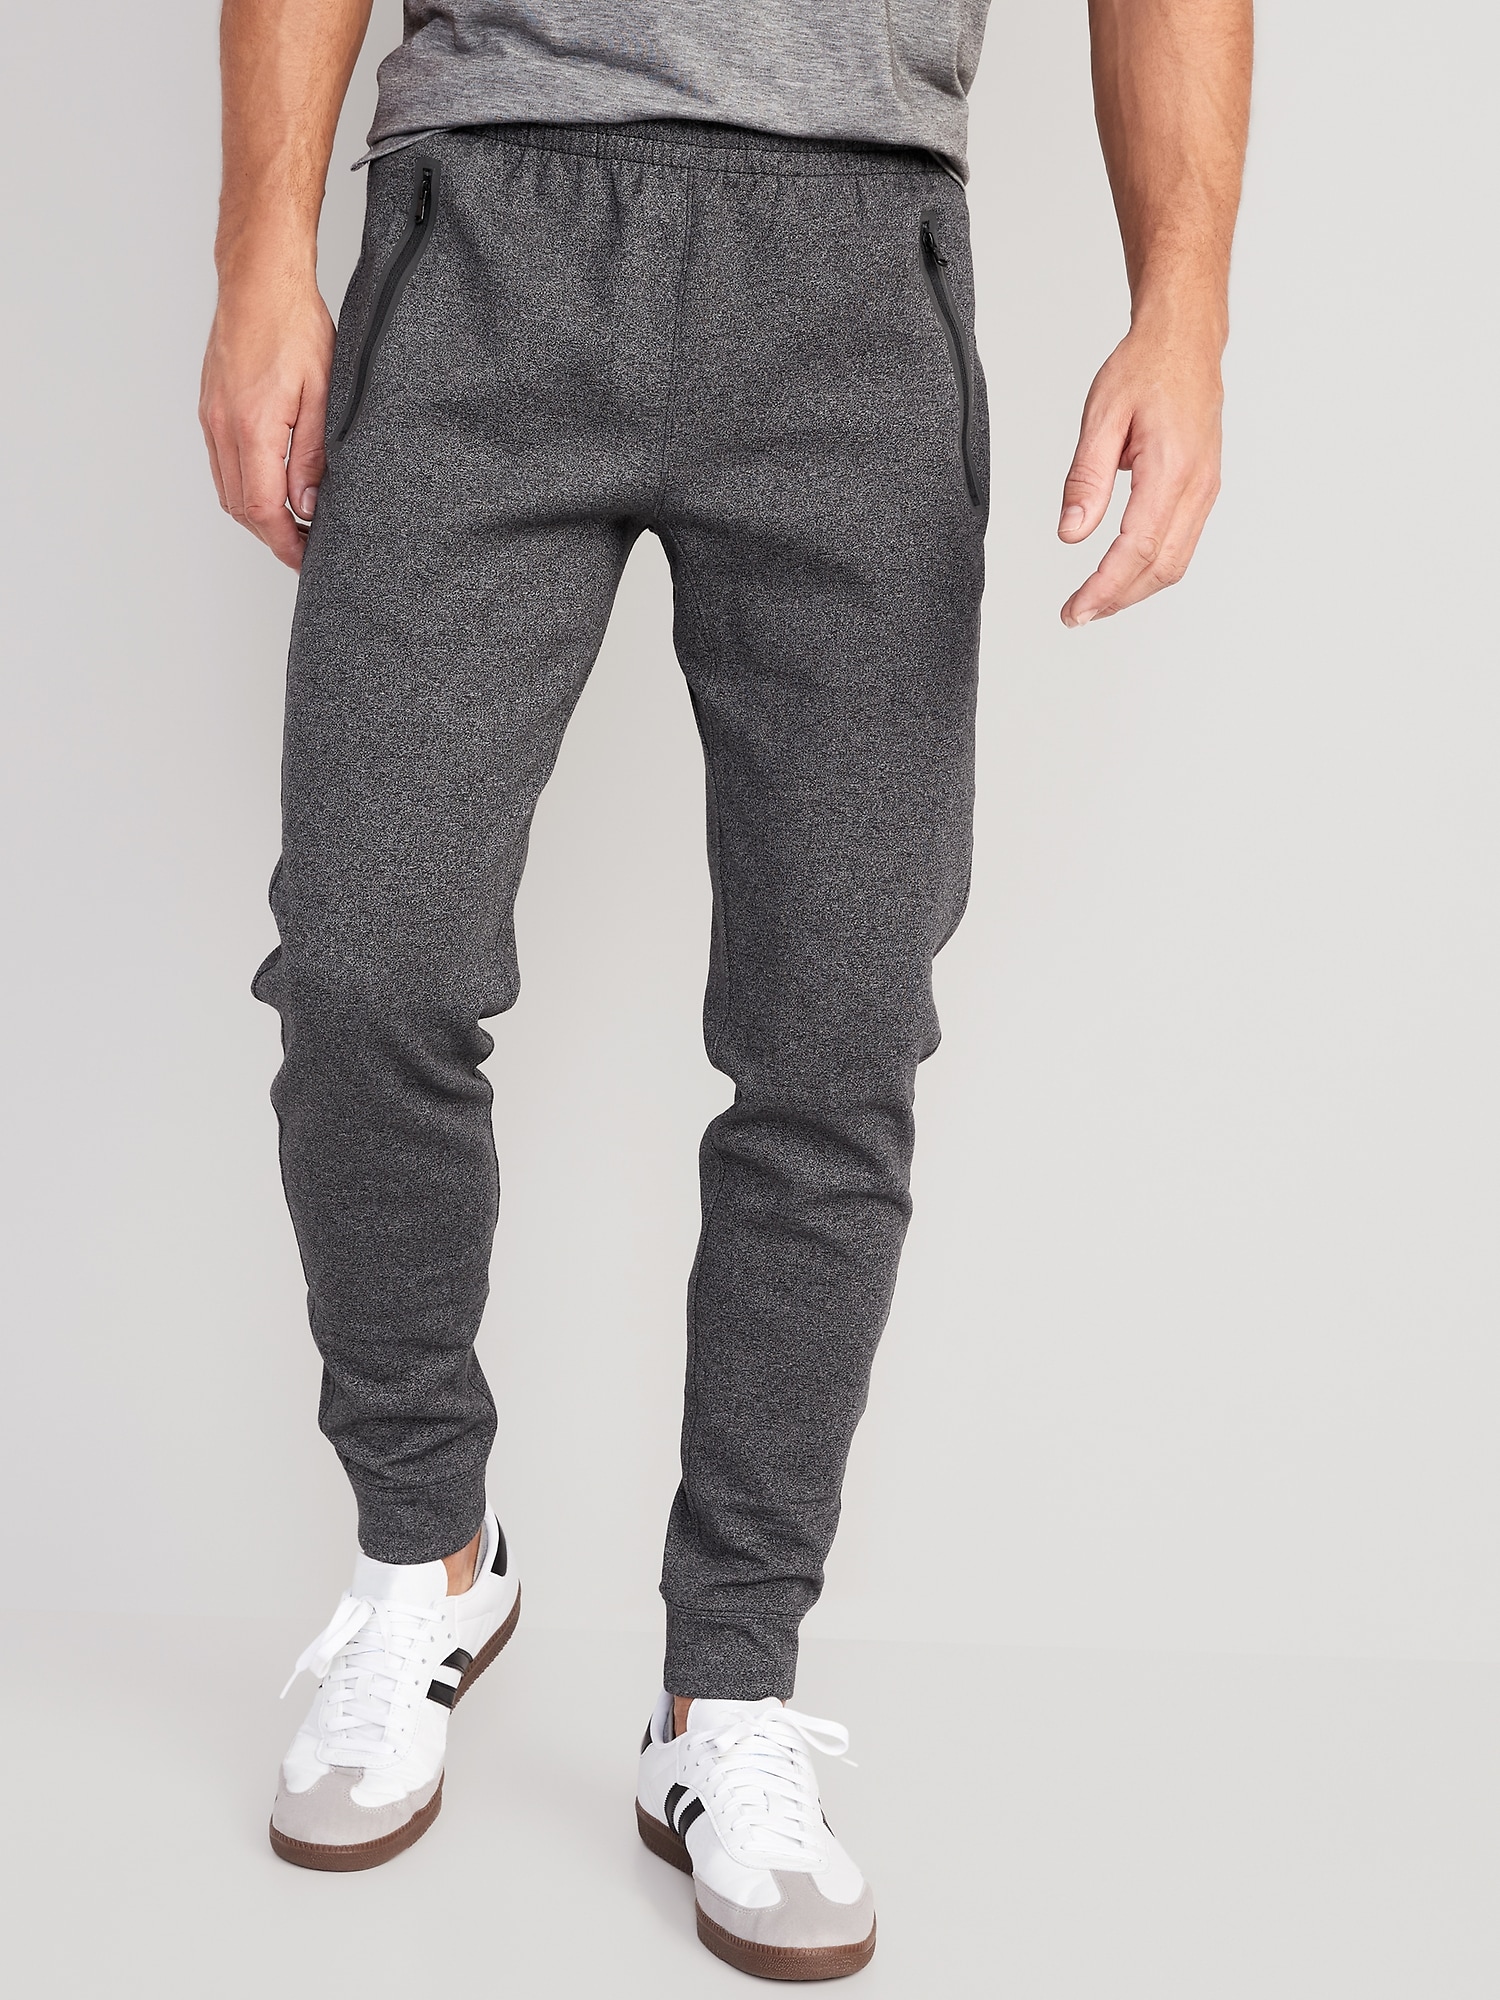 Old Navy Dynamic Cinch Pintucked Sweatpants, Pants